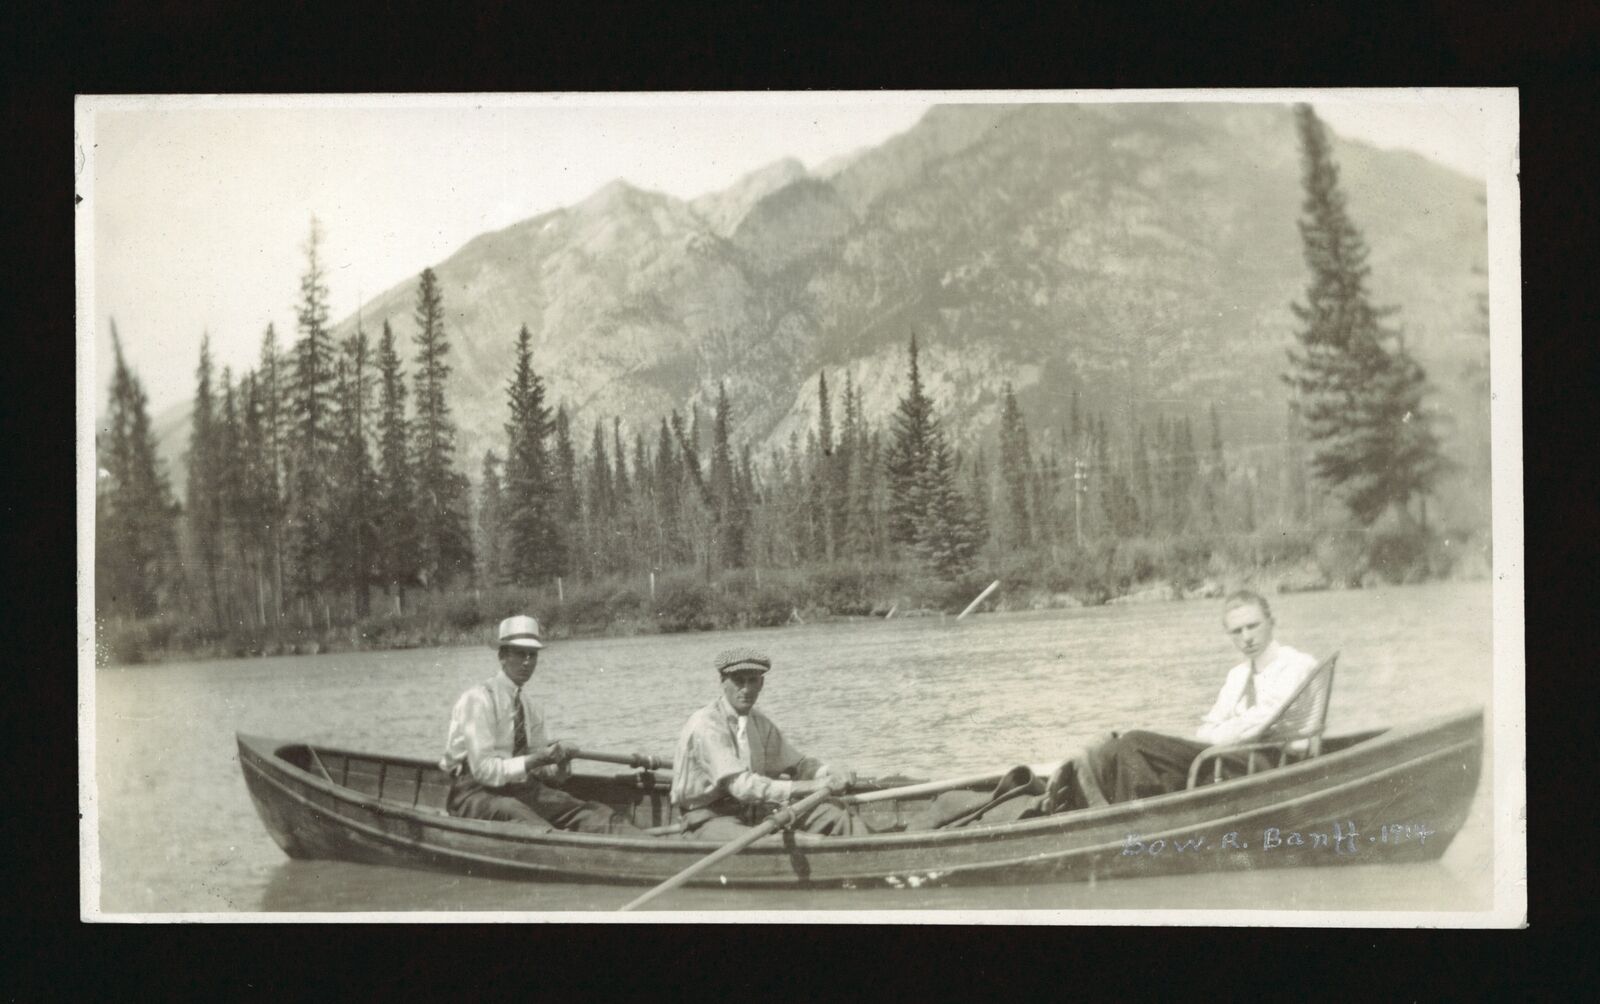 Bow R Banff 1914 - showing three men in a canoe on the Bow River Old Photo